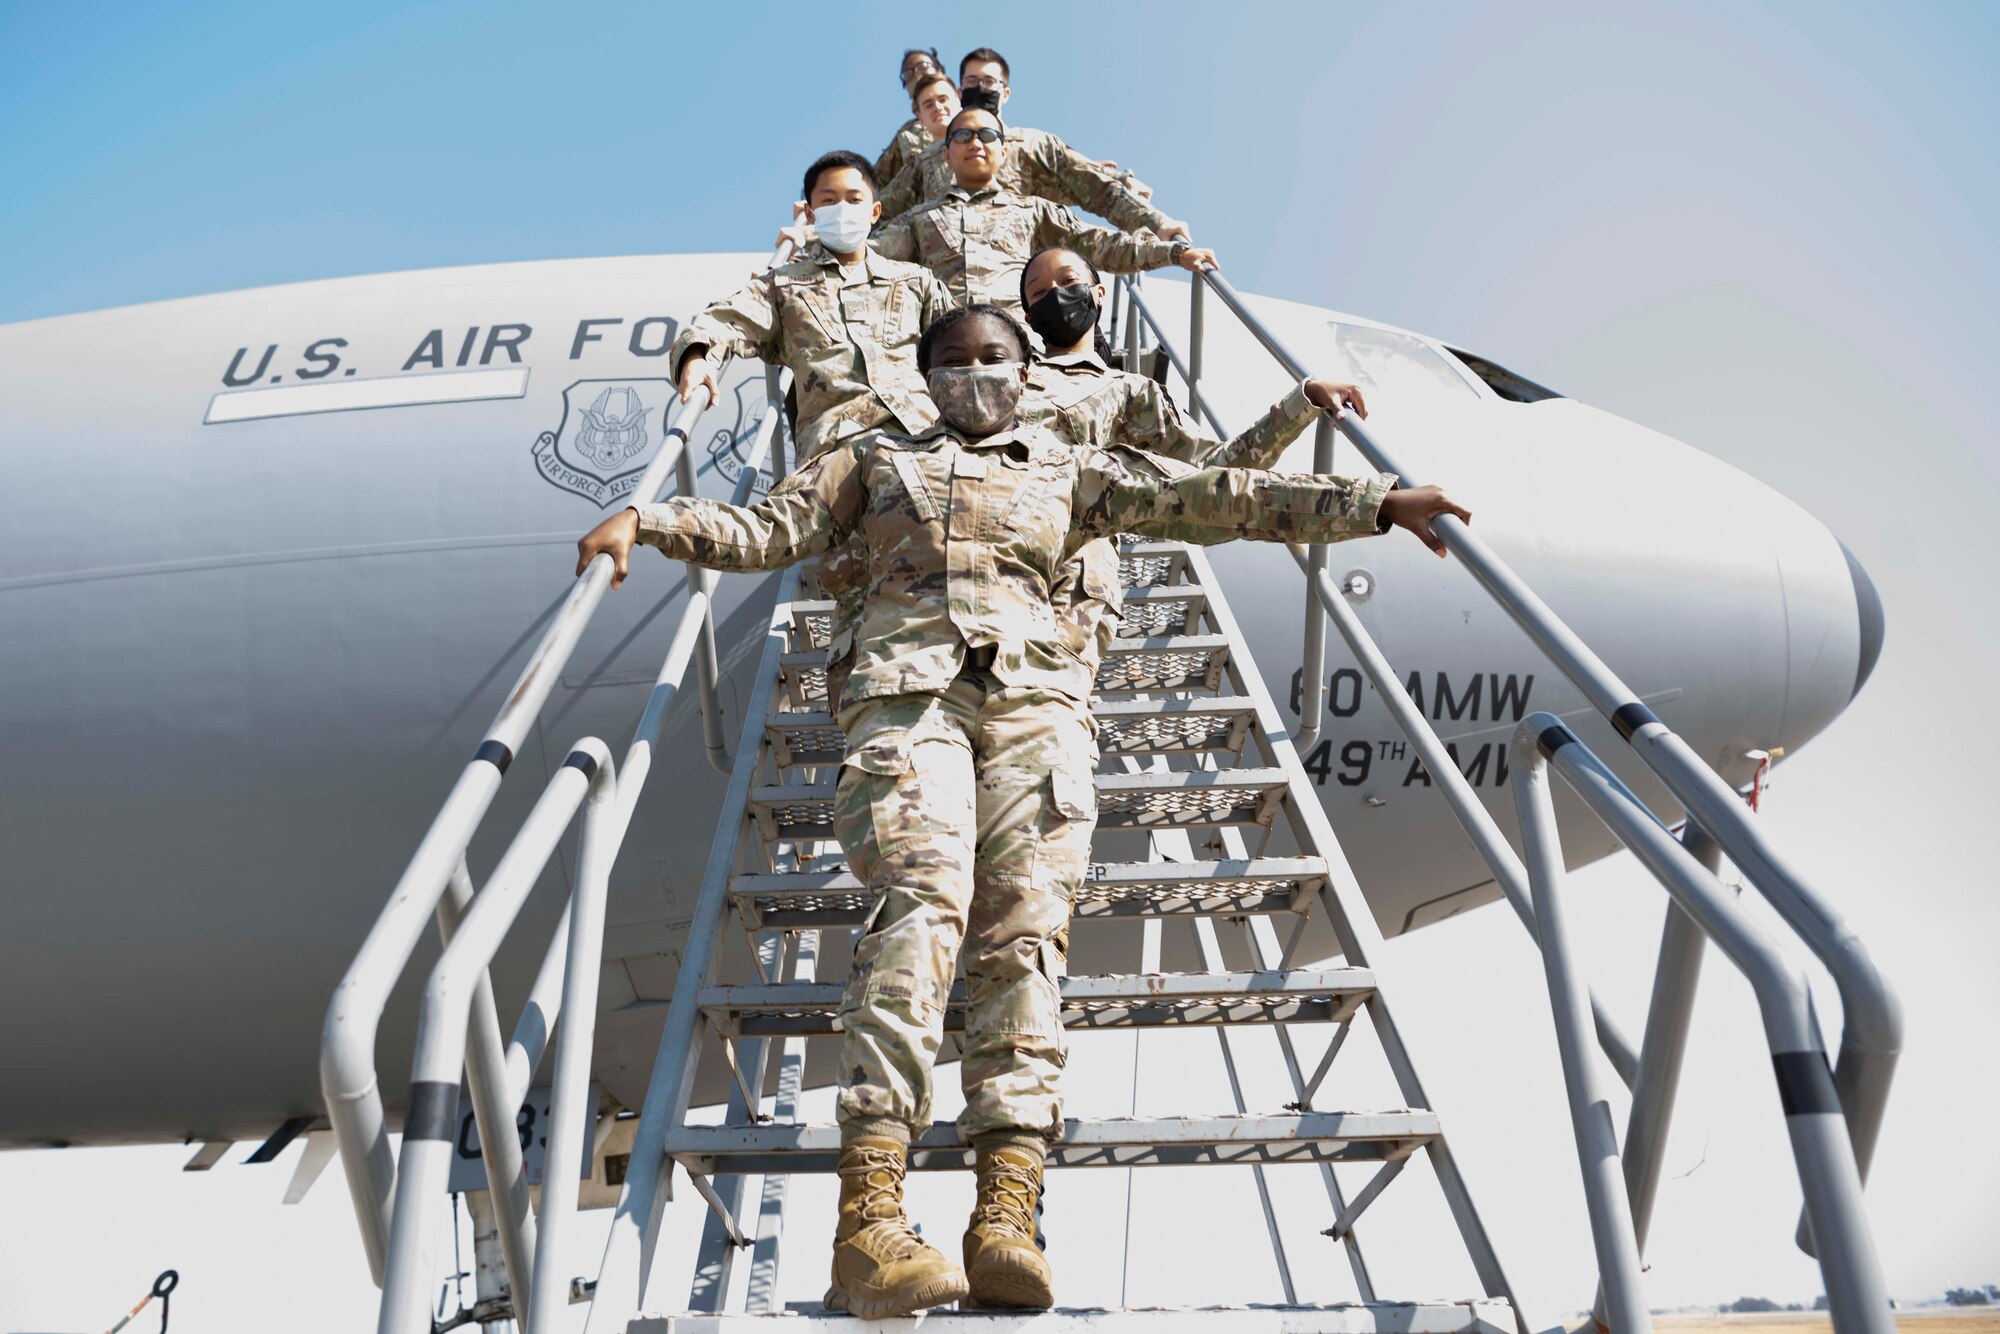 Airmen pose for photo on stairs of an aircraft